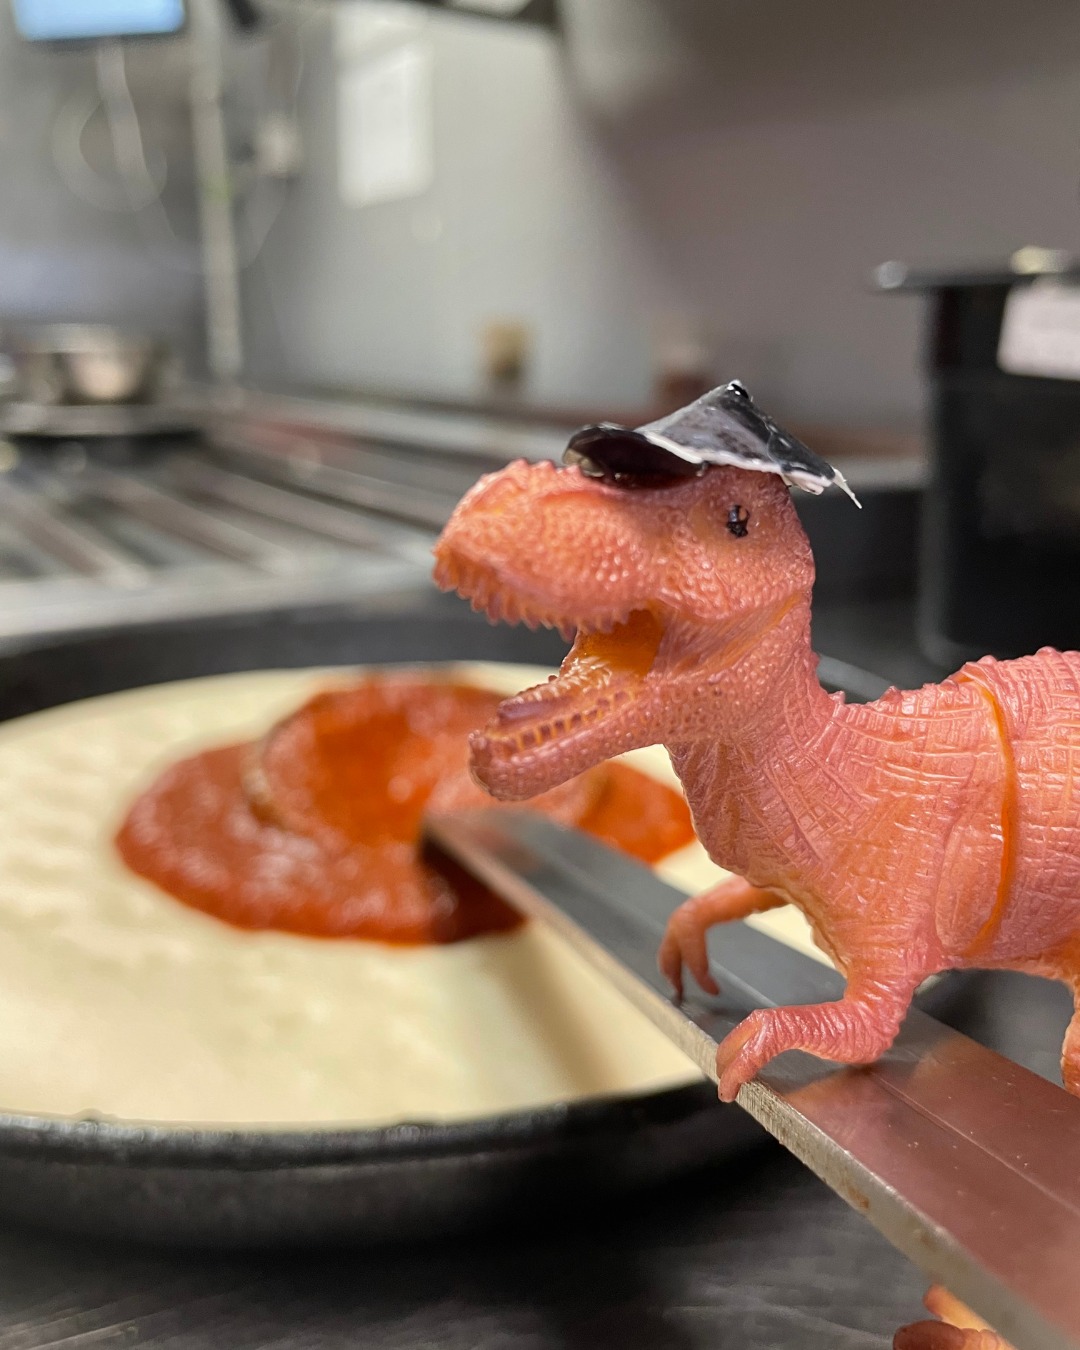 Bitey the dinosaur toy making pizza at Domino's. He's "holding" a utensil to spread sauce on a pizza.